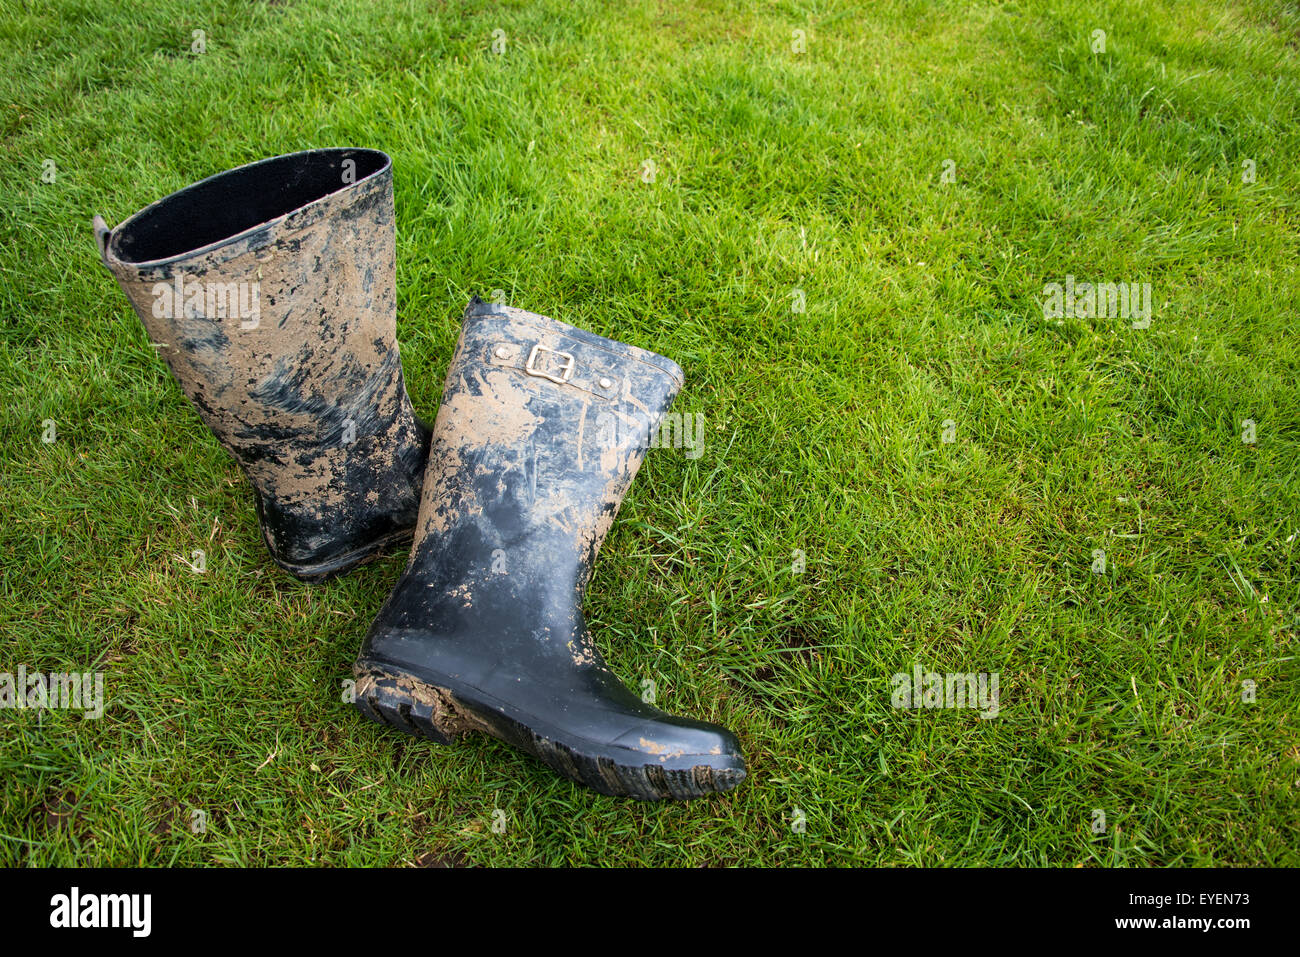 Dirty Wellington boots brought back from music festival Stock Photo